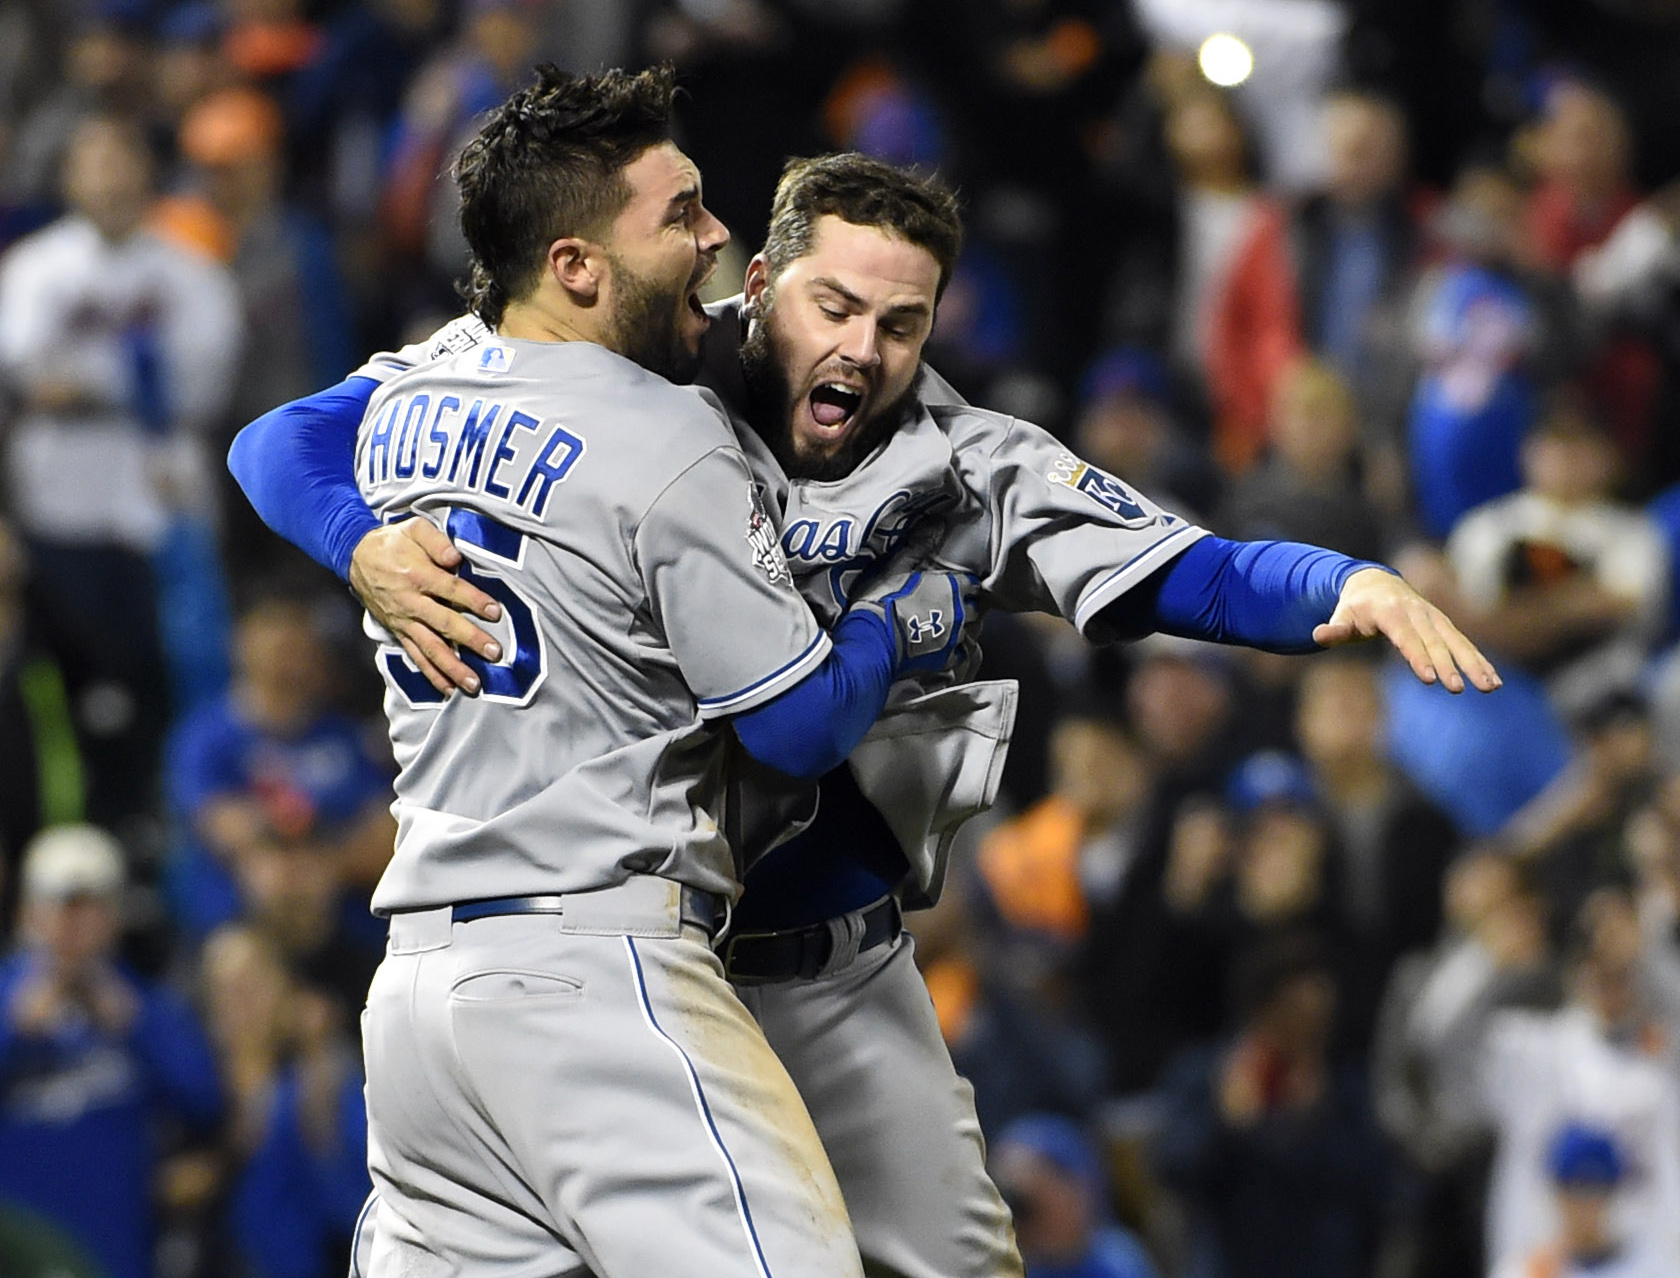 Former ALL-USA stars Eric Hosmer and Mike Moustakas live dream as World  Series champions